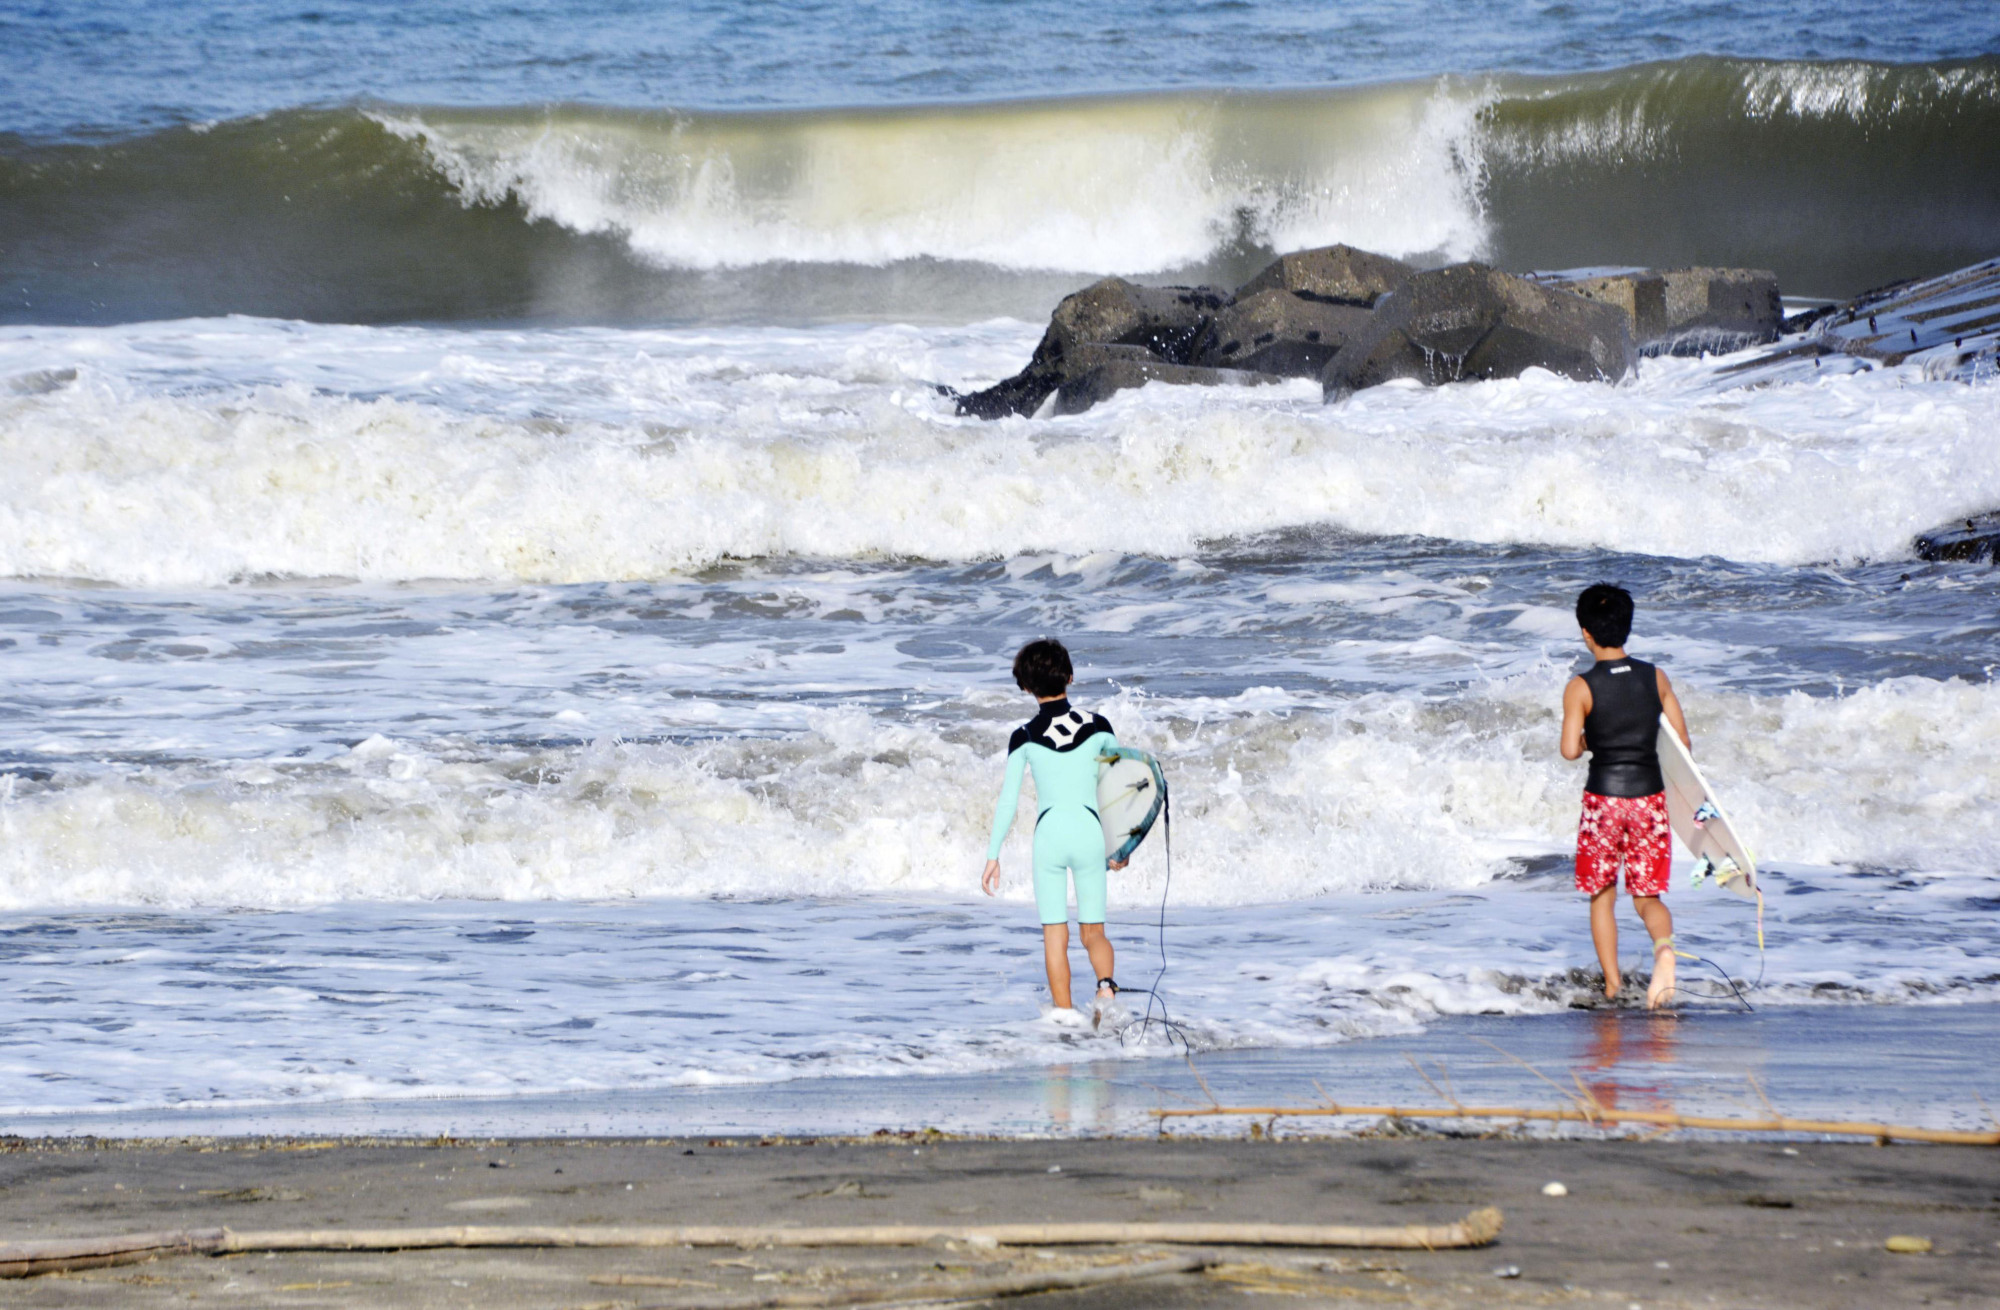 Surfers hit the waves at Tsurigasaki beach in Ichinomiya, Chiba Prefecture, which will host the surfing events for the Tokyo 2020 Olympics. | ??